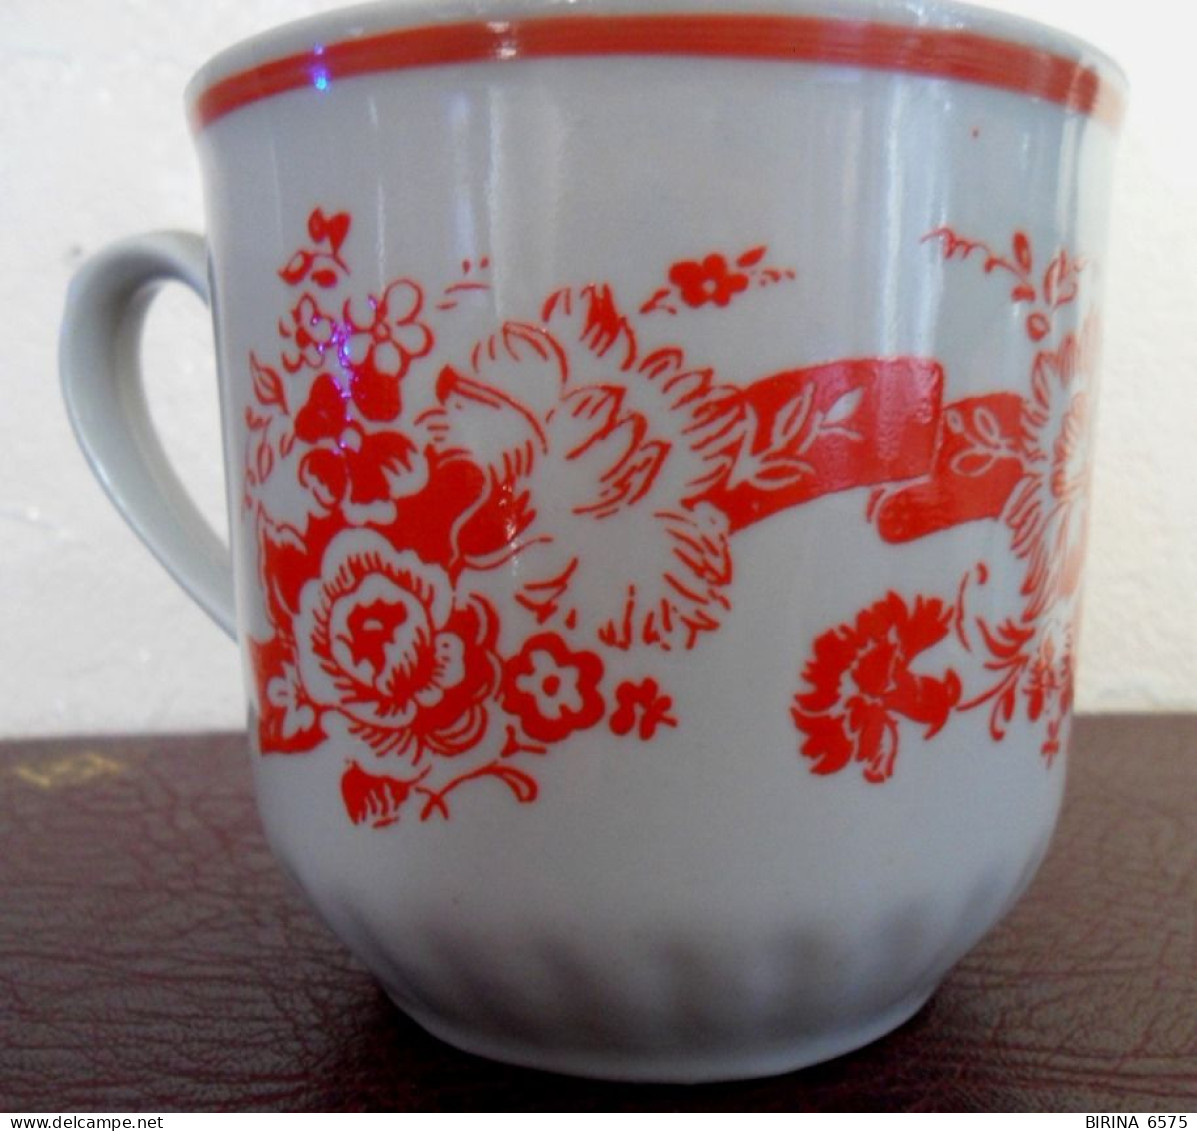 A Cup. Cup. Flowers. TERNOPIL PORCELAIN FACTORY. USSR. - 8-19-i - Cups